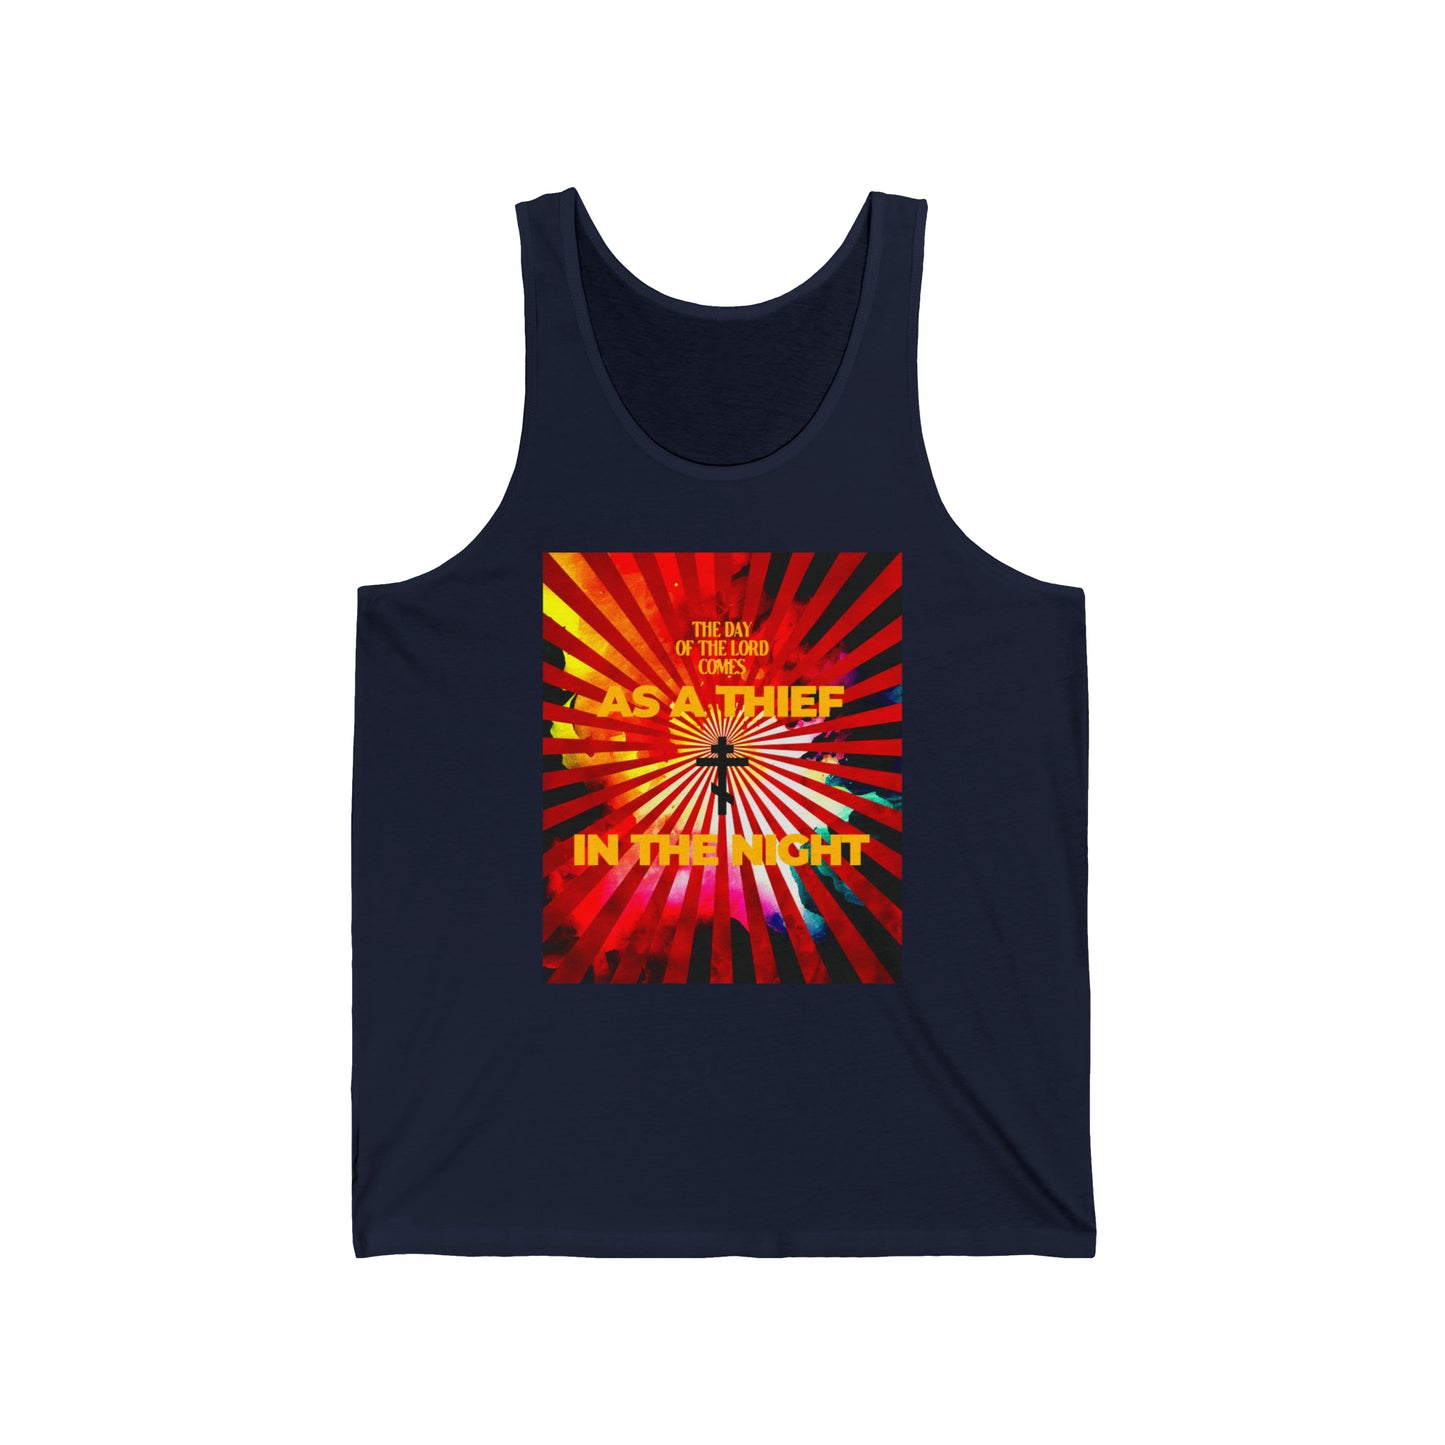 The Day of the Lord No. 3 | Orthodox Christian Jersey Tank Top / Sleeveless Shirt